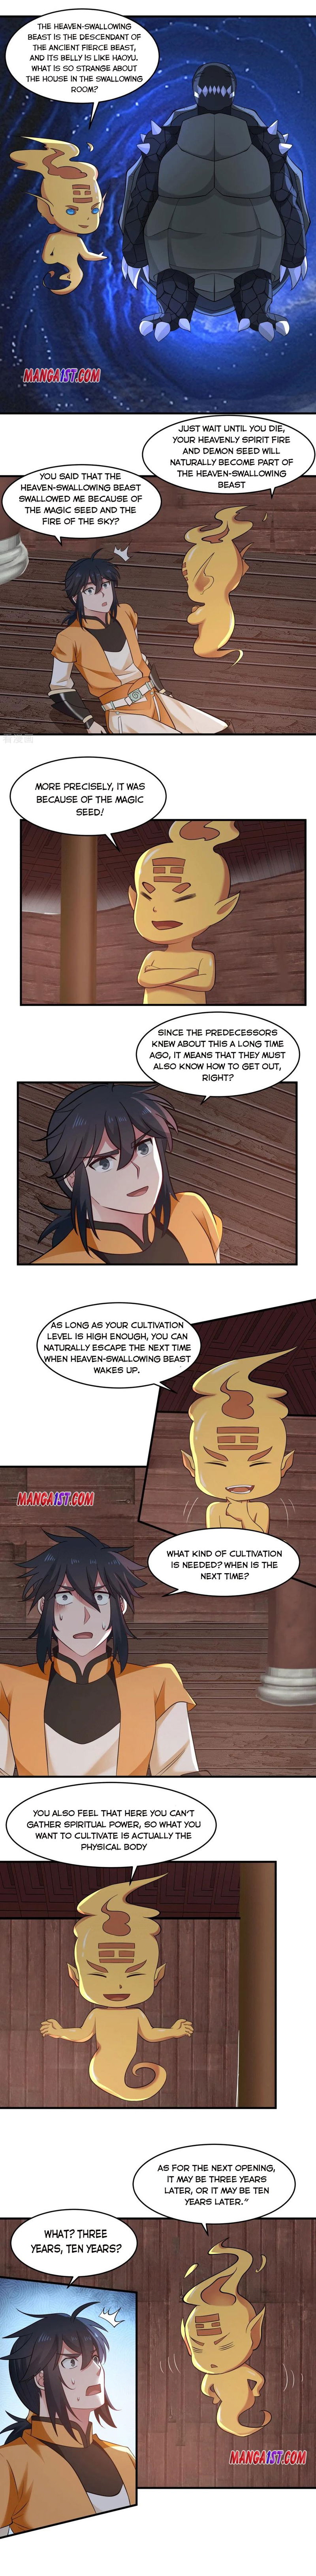 Chaos Alchemist Chapter 69 page 2